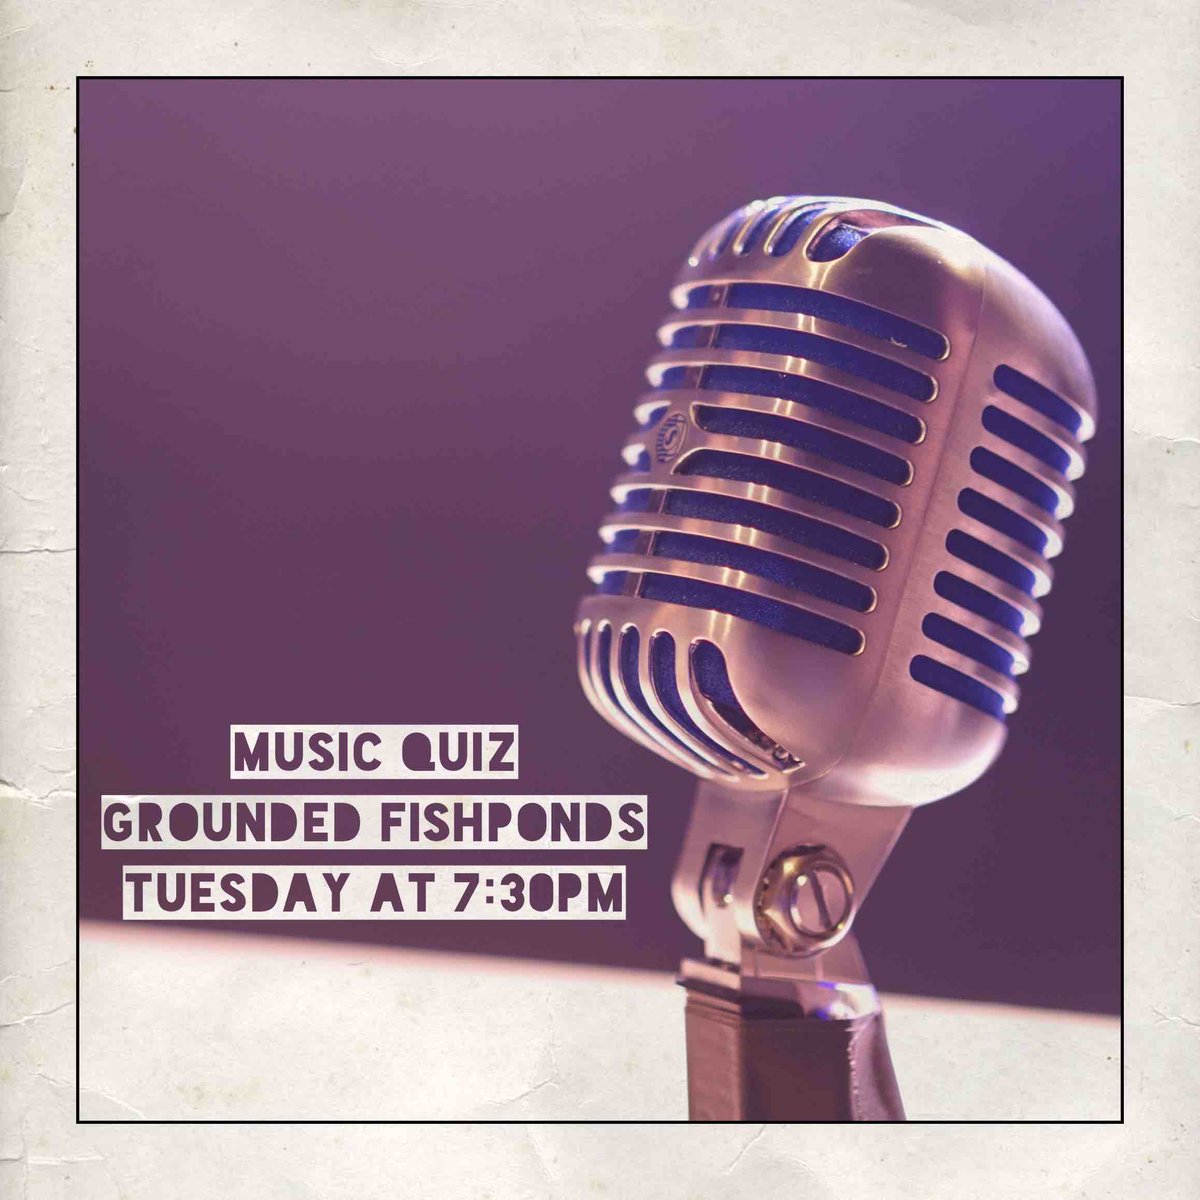 Join us on Tuesday at #Grounded #Fishponds in #Bristol for our next #QuizNight! 7:30pm start for our #Music #Quiz with pizza vouchers and free entry to be won